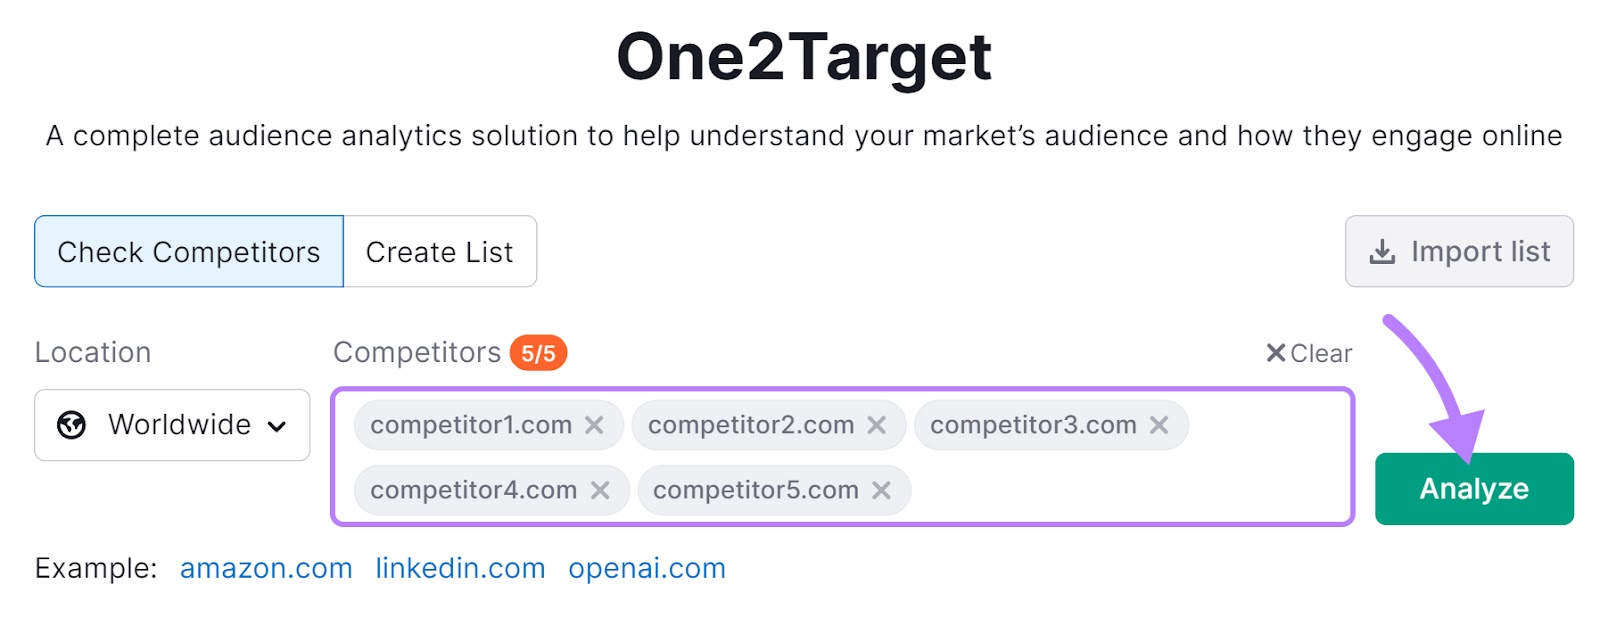 One2Target tool search